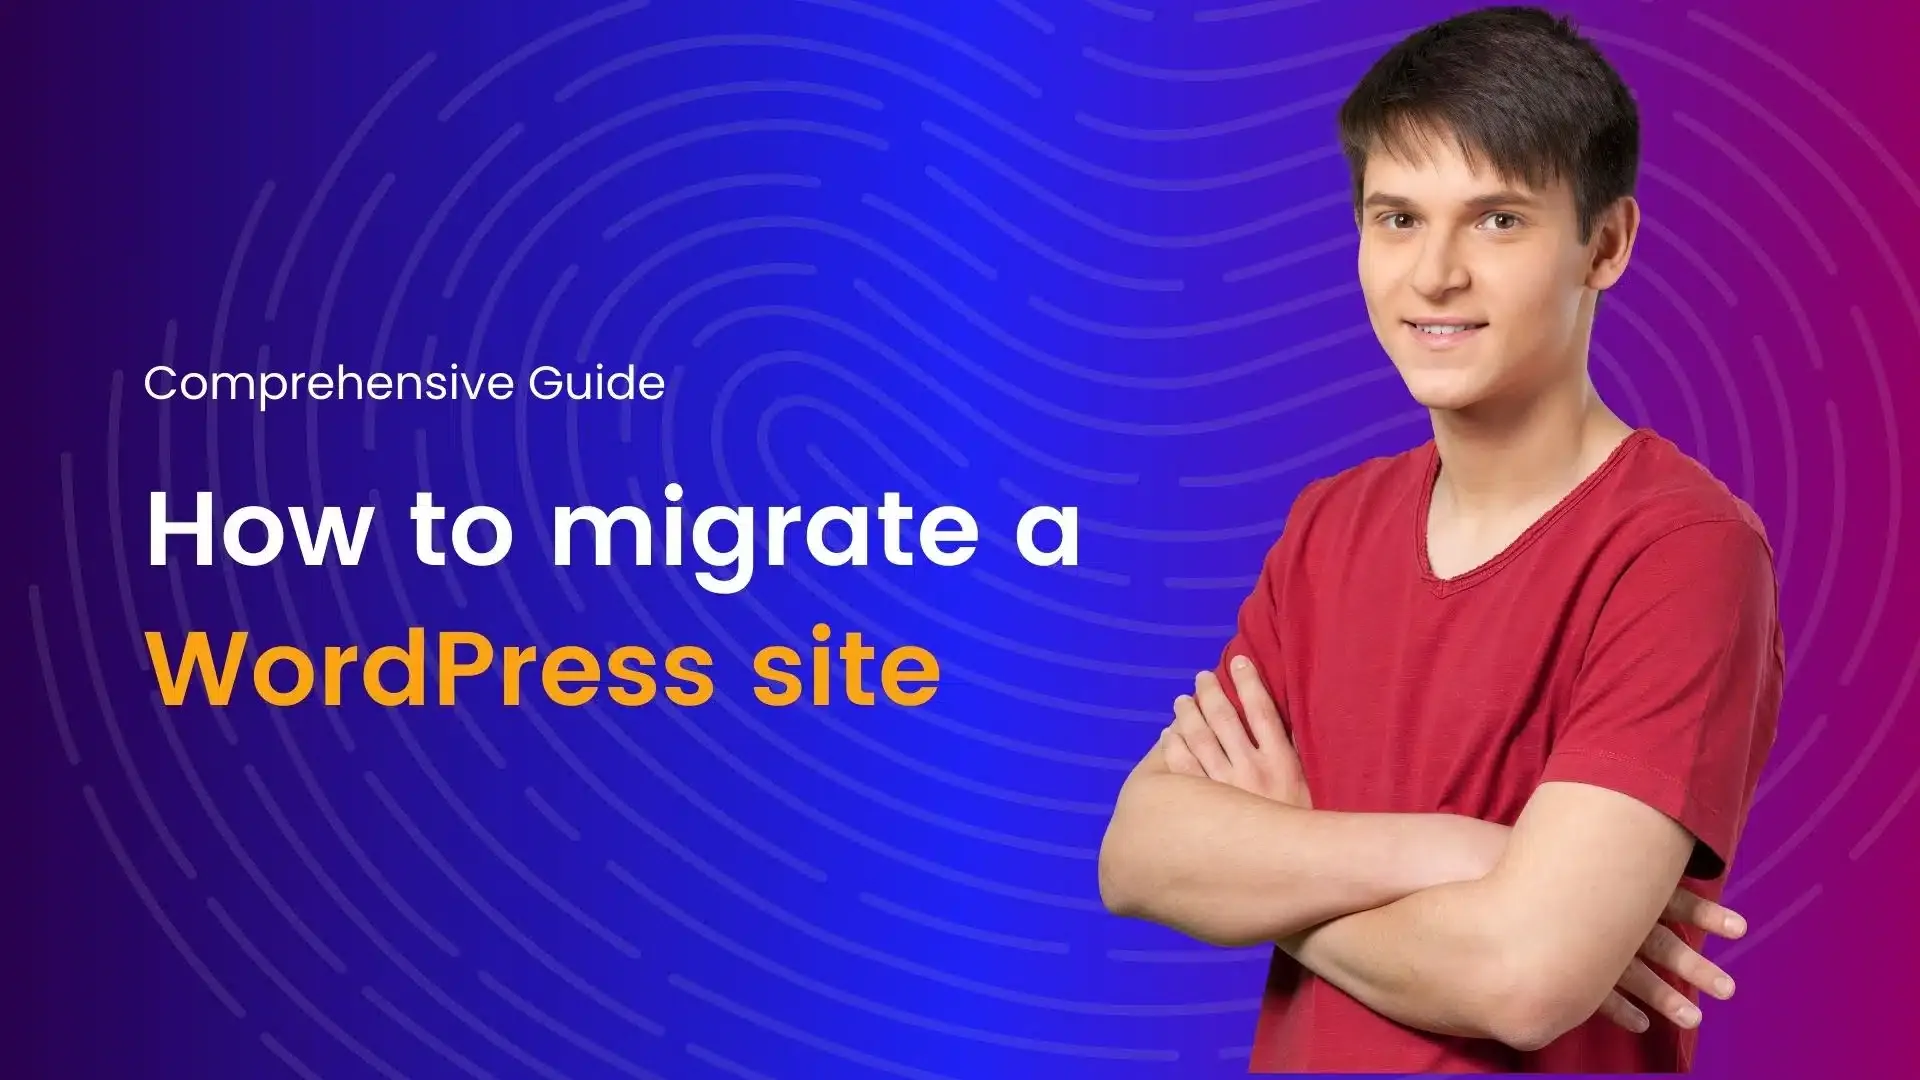 How to migrate a WordPress site to a new host